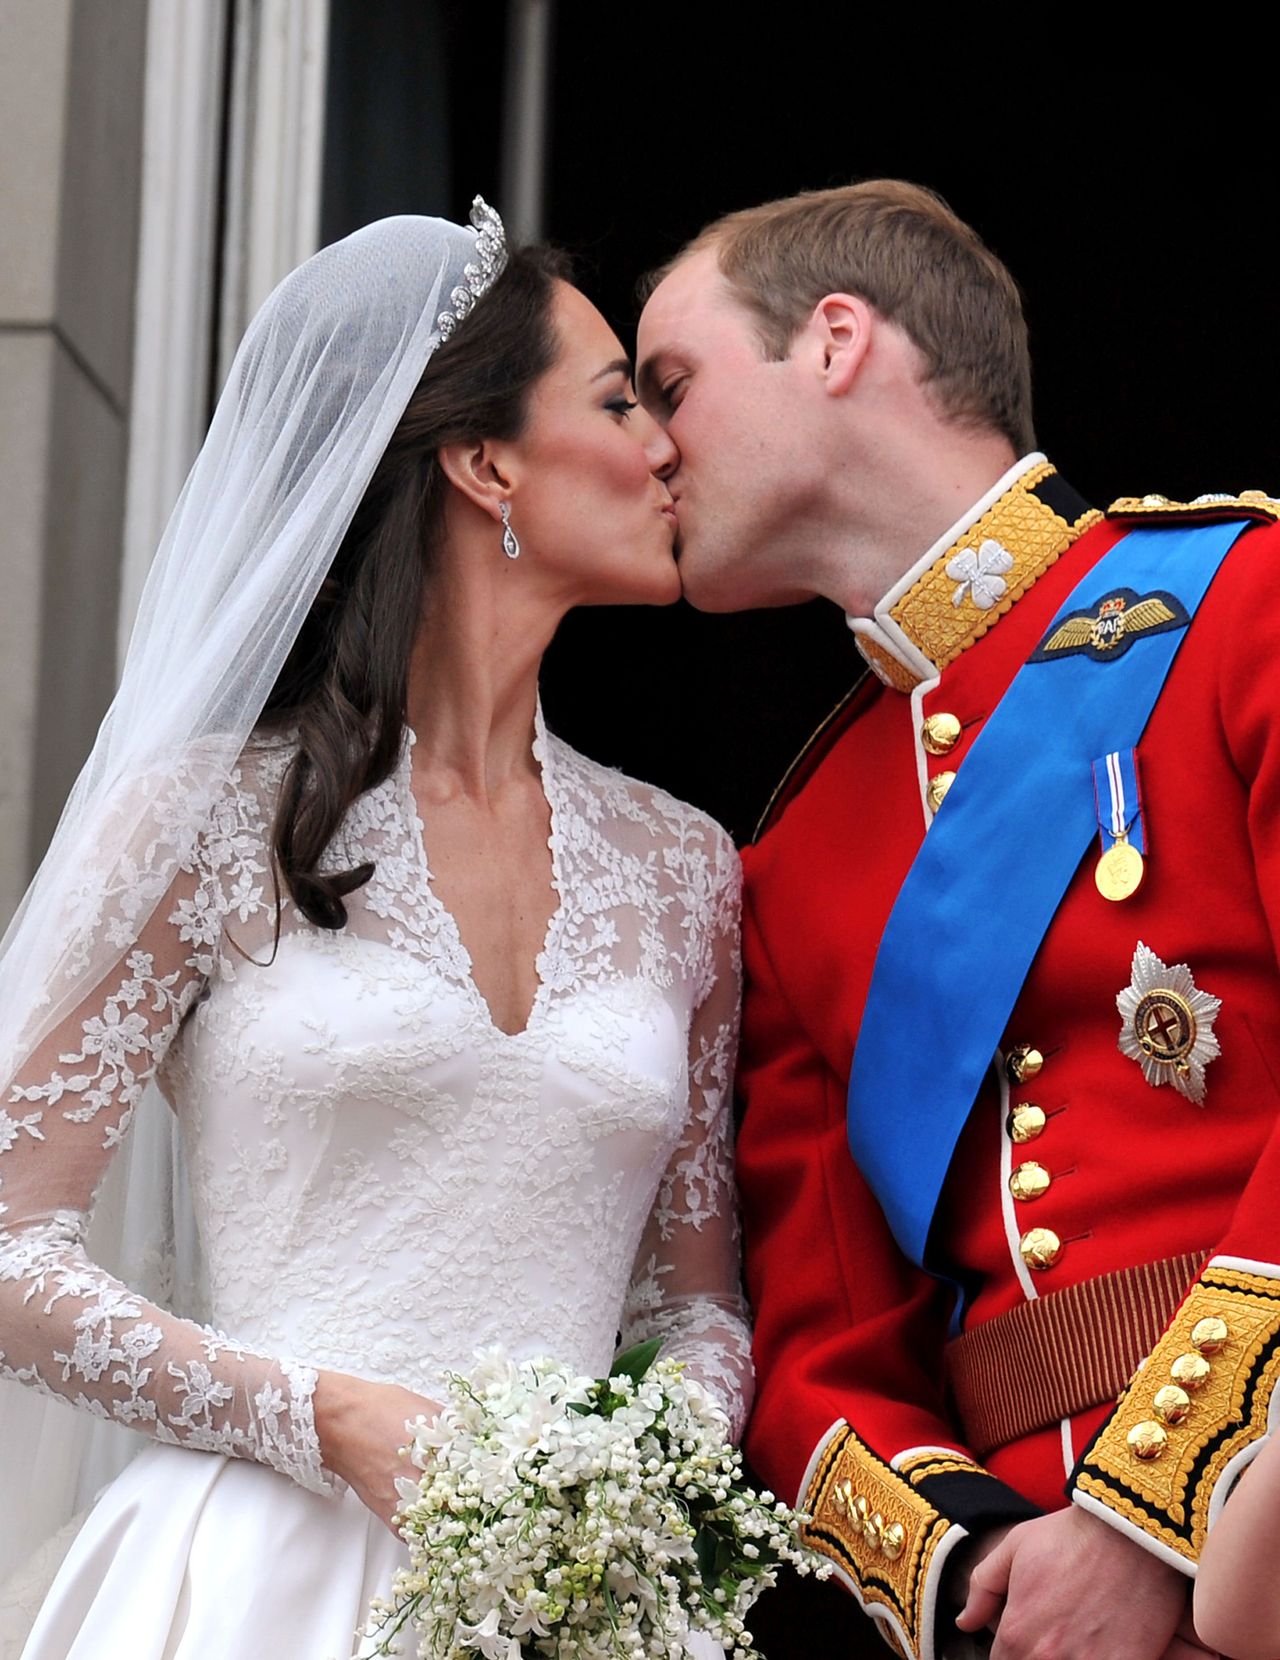 <strong>Prince William wore the Irish Guards uniform to his 2011 wedding </strong>